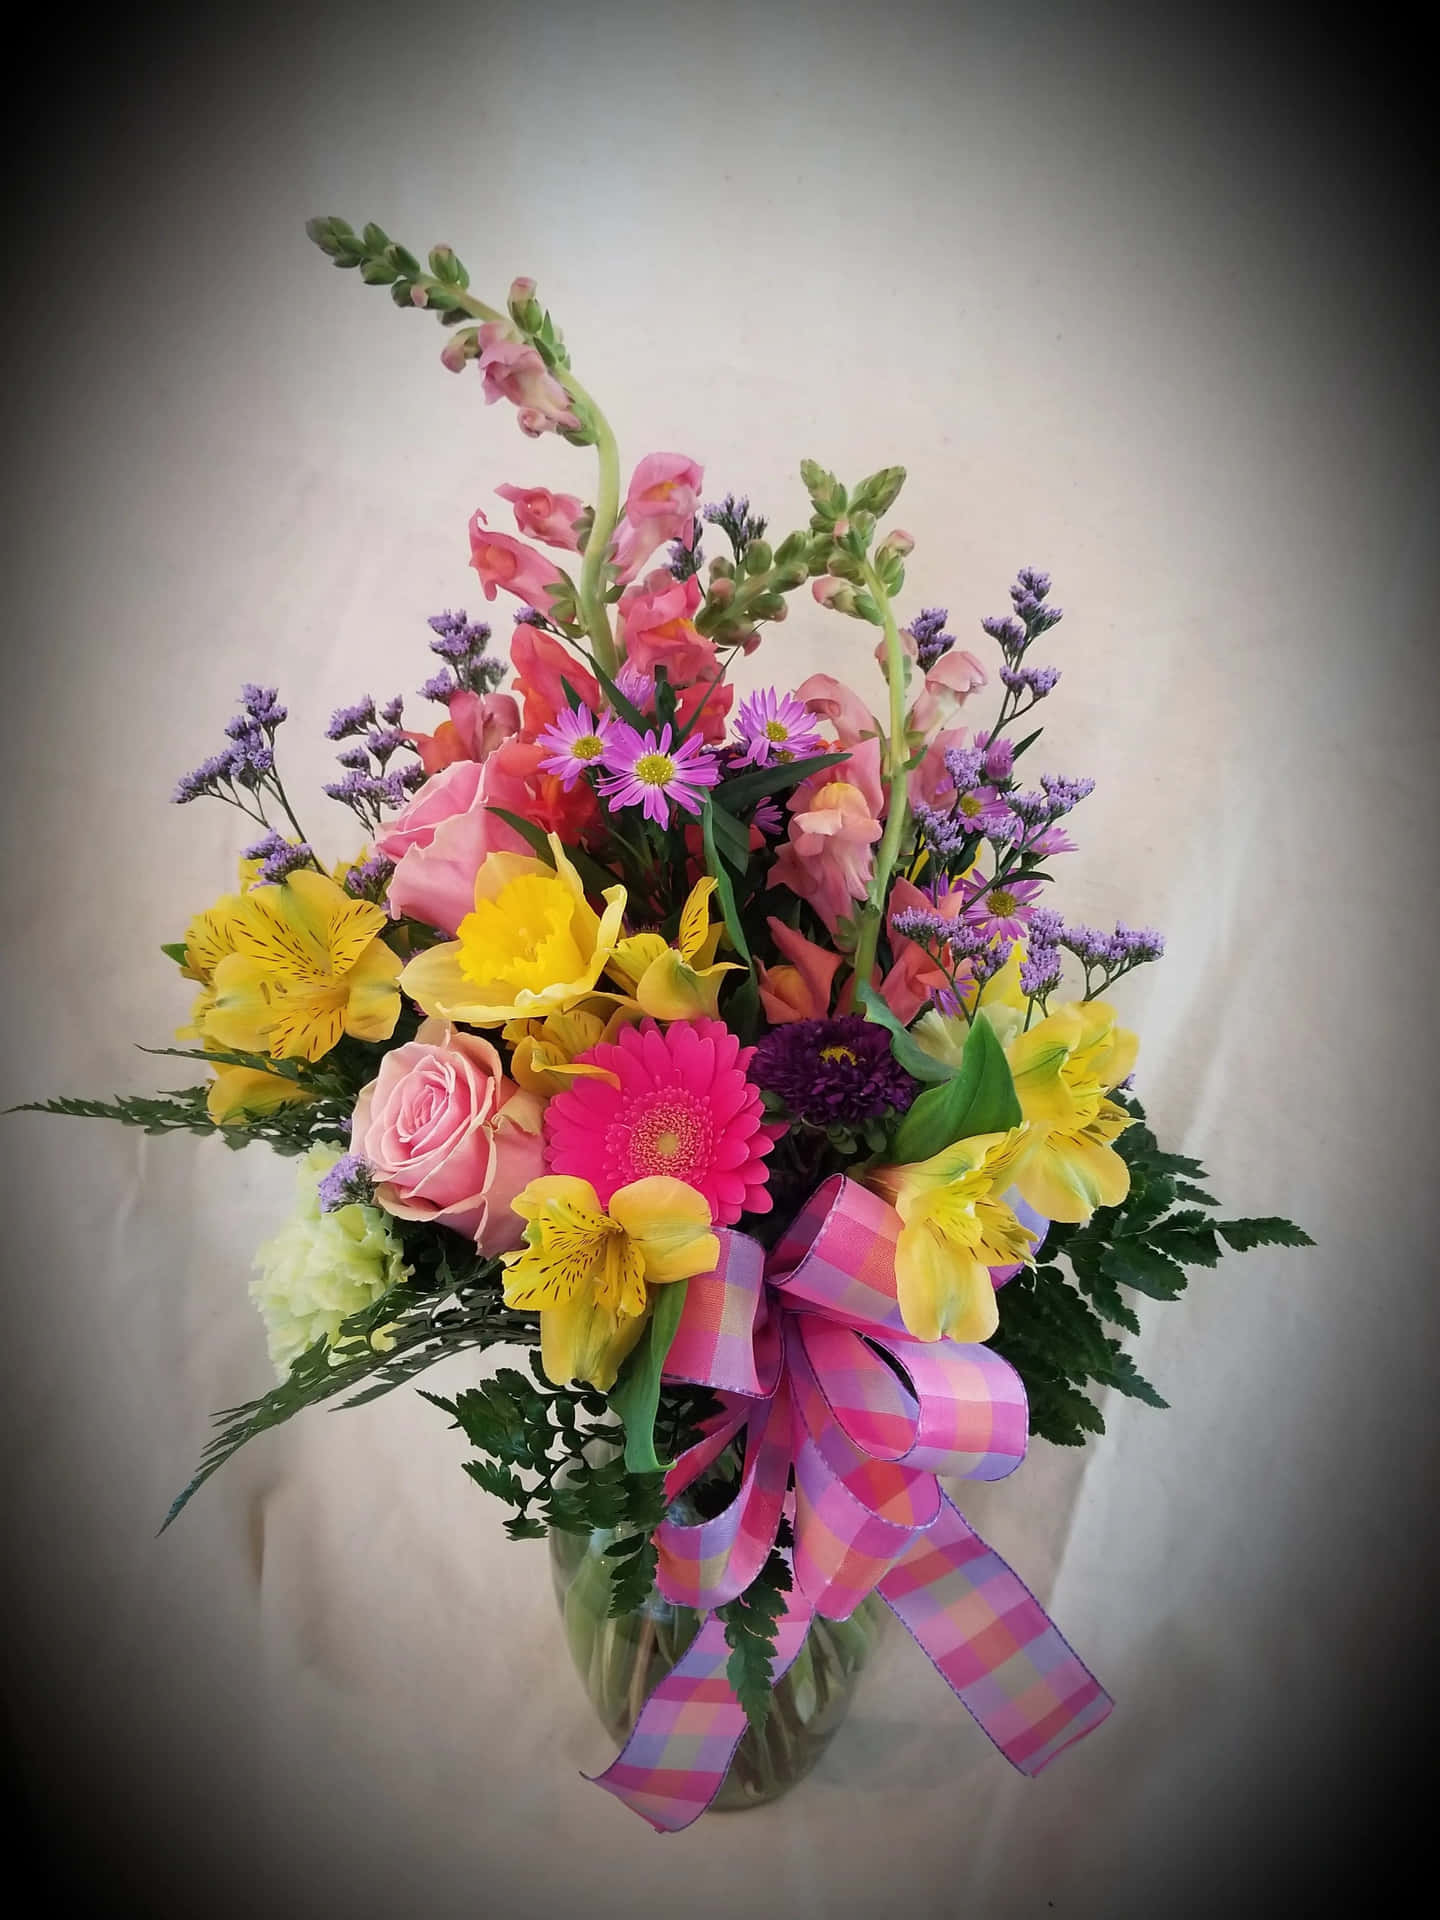 A Colorful Arrangement Of Flowers In A Vase